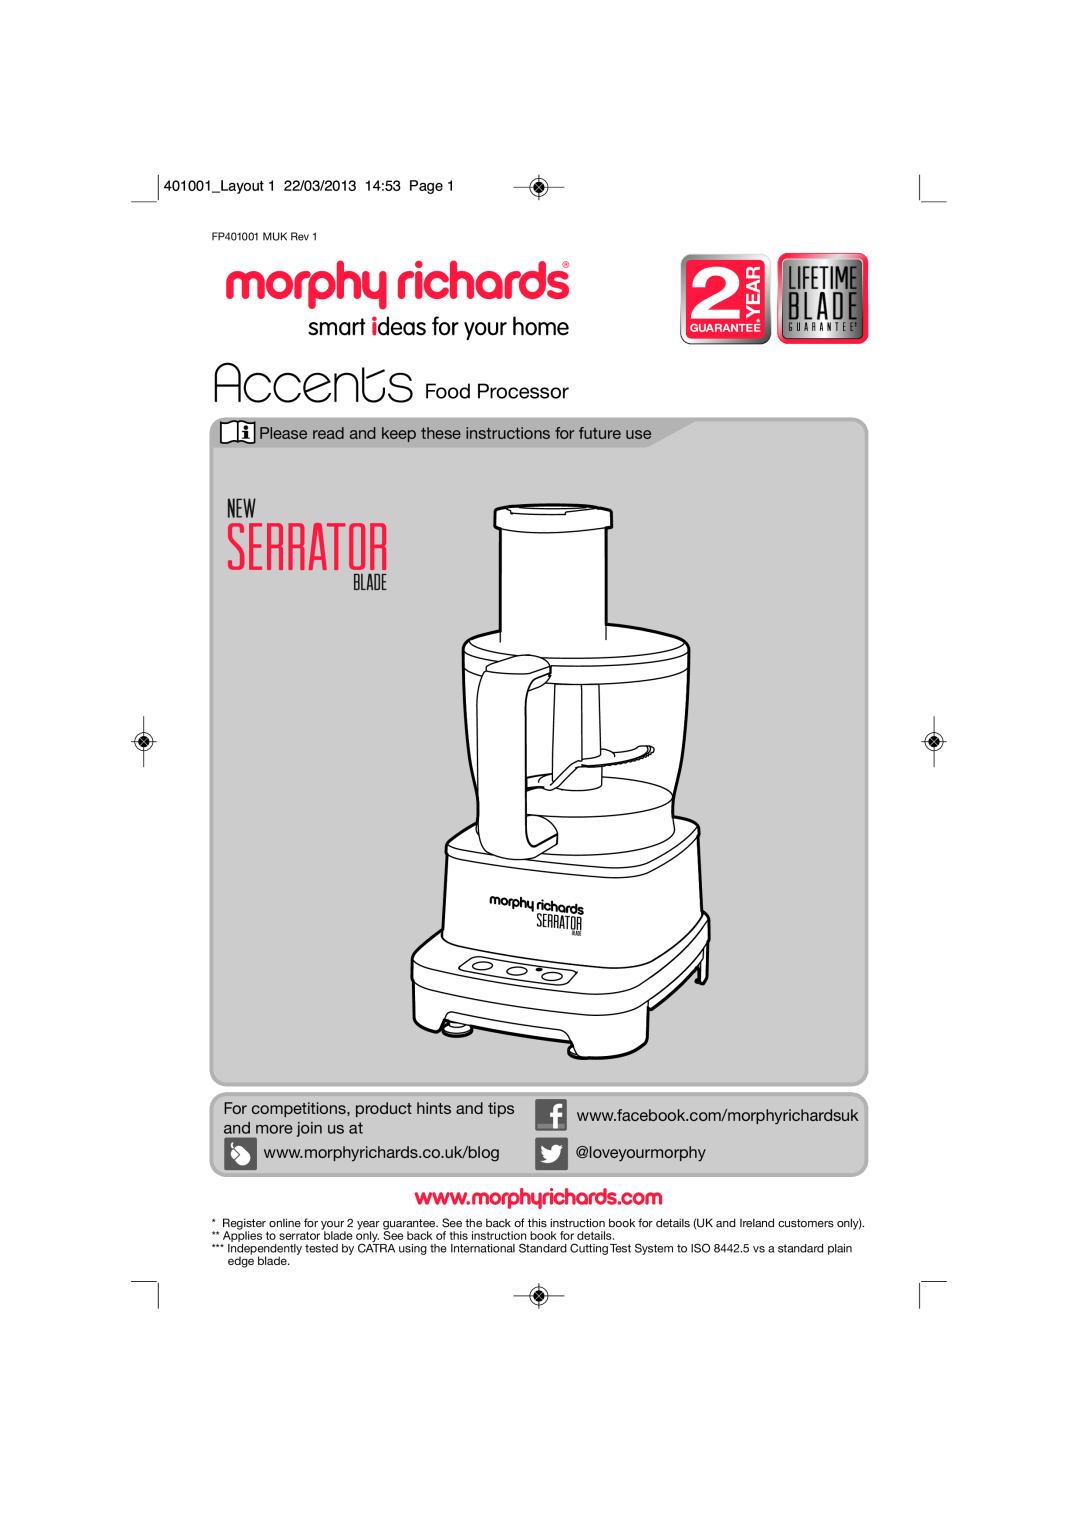 Morphy Richards FP401001 manual 2YEAR, Food Processor, Please read and keep these instructions for future use 